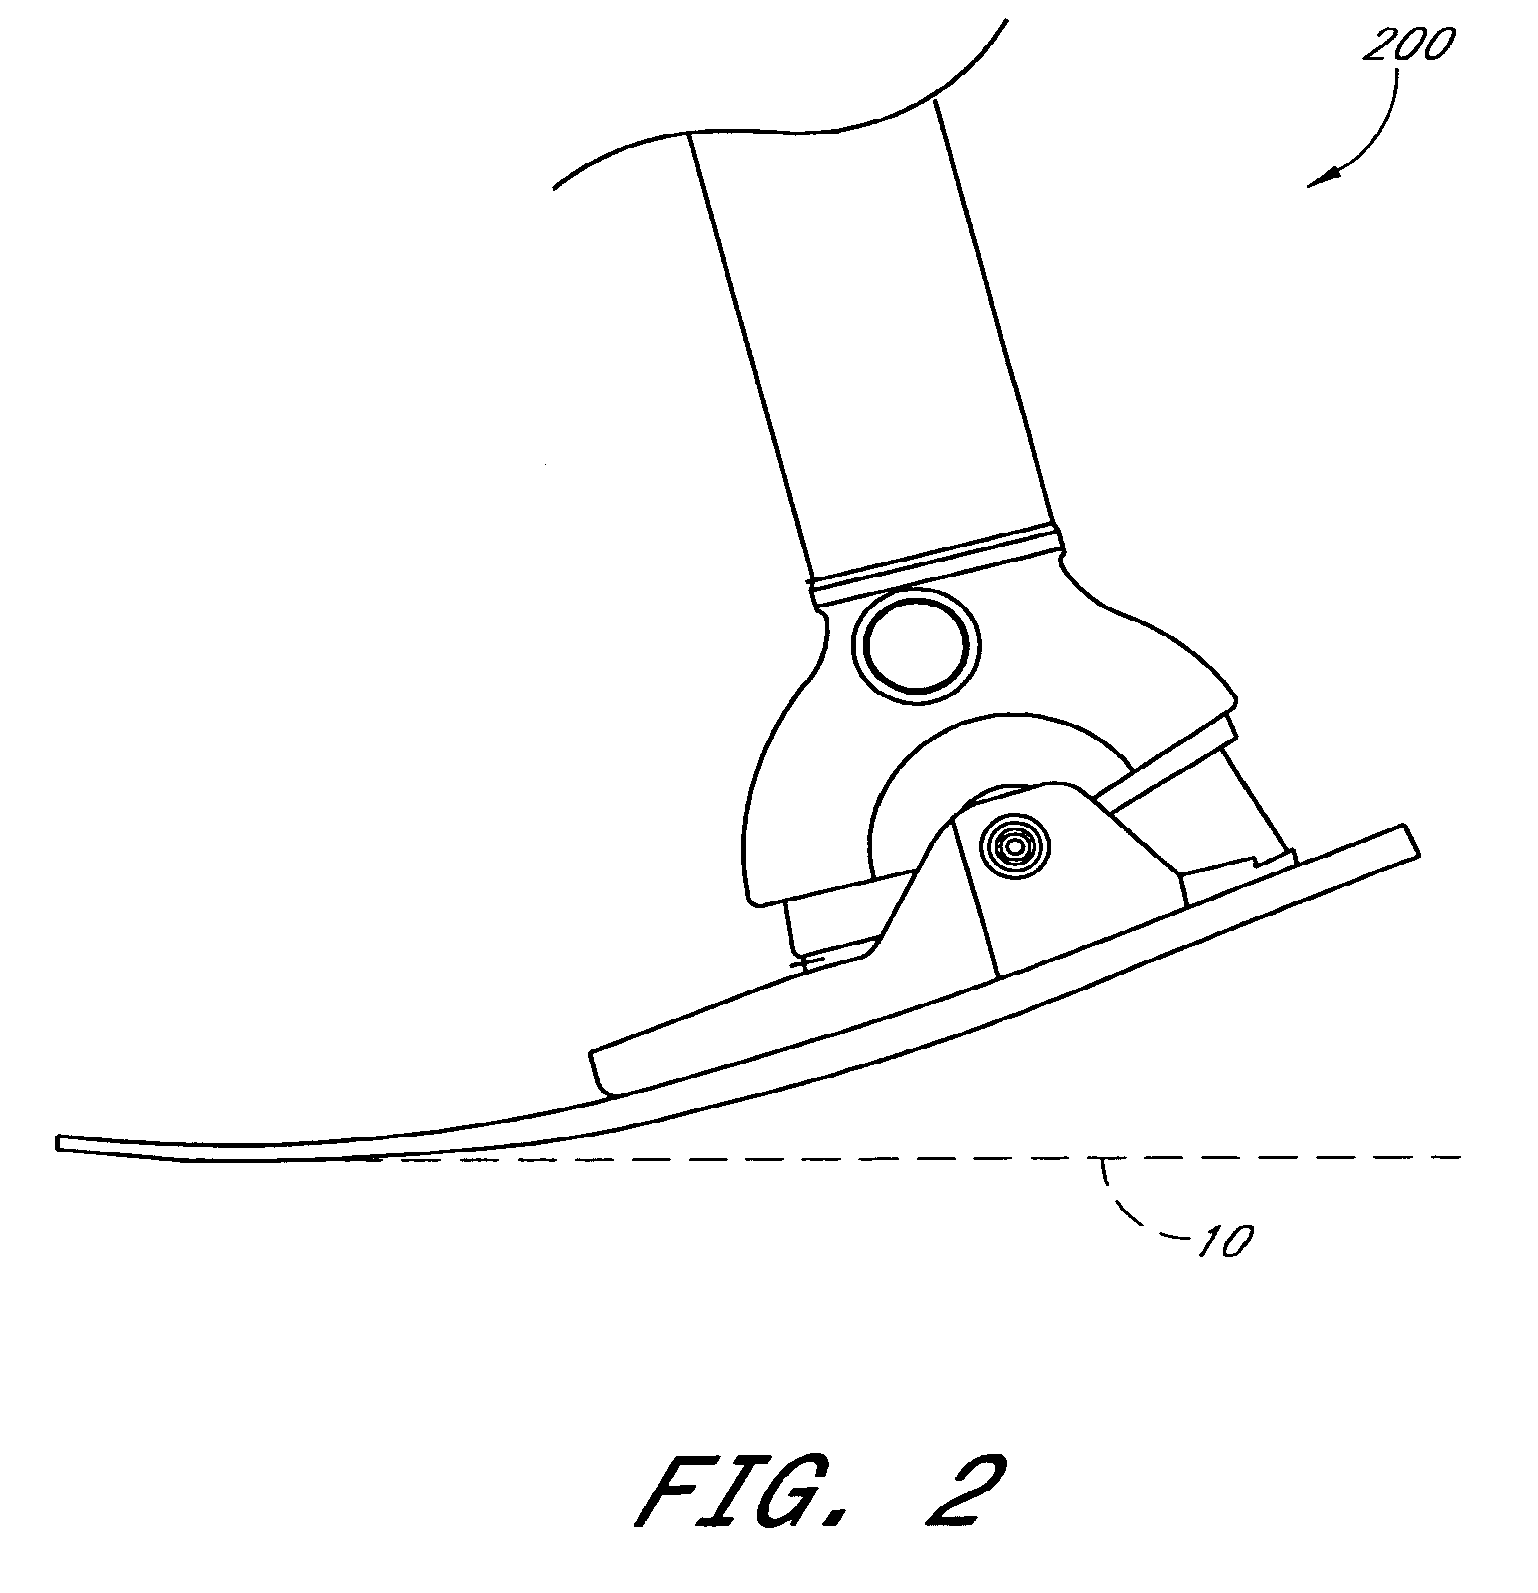 Method of measuring the performance of a prosthetic foot